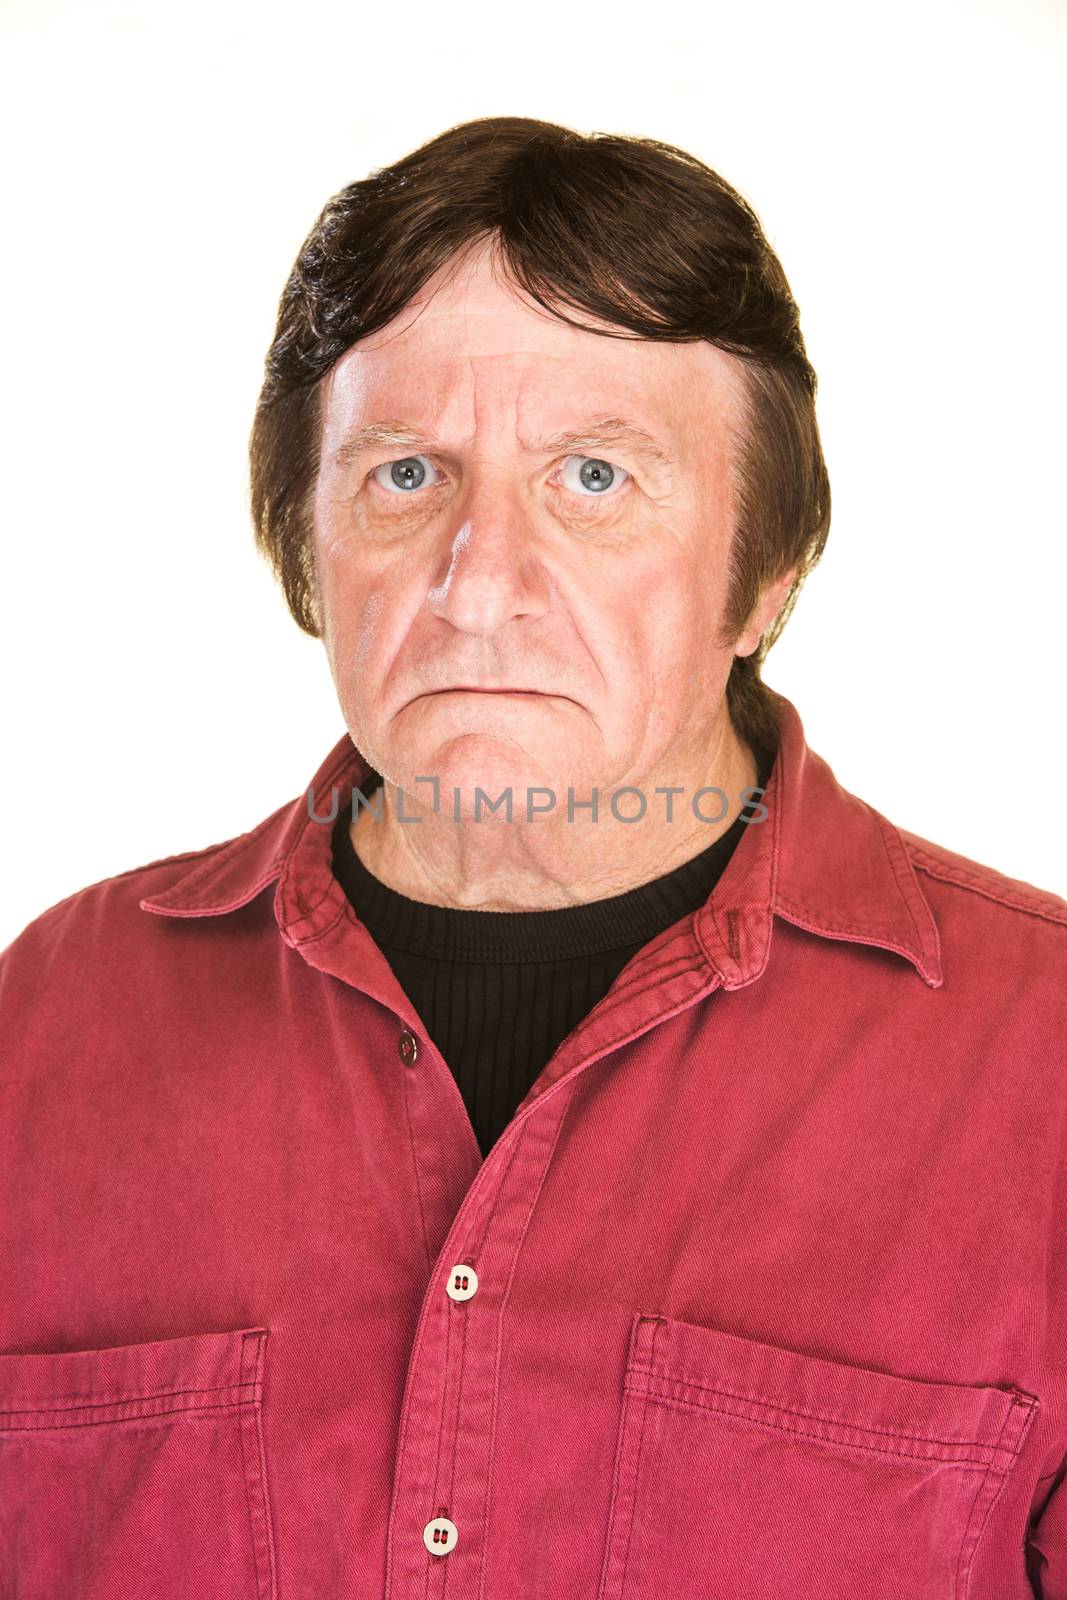 Suspicious middle aged male over white background